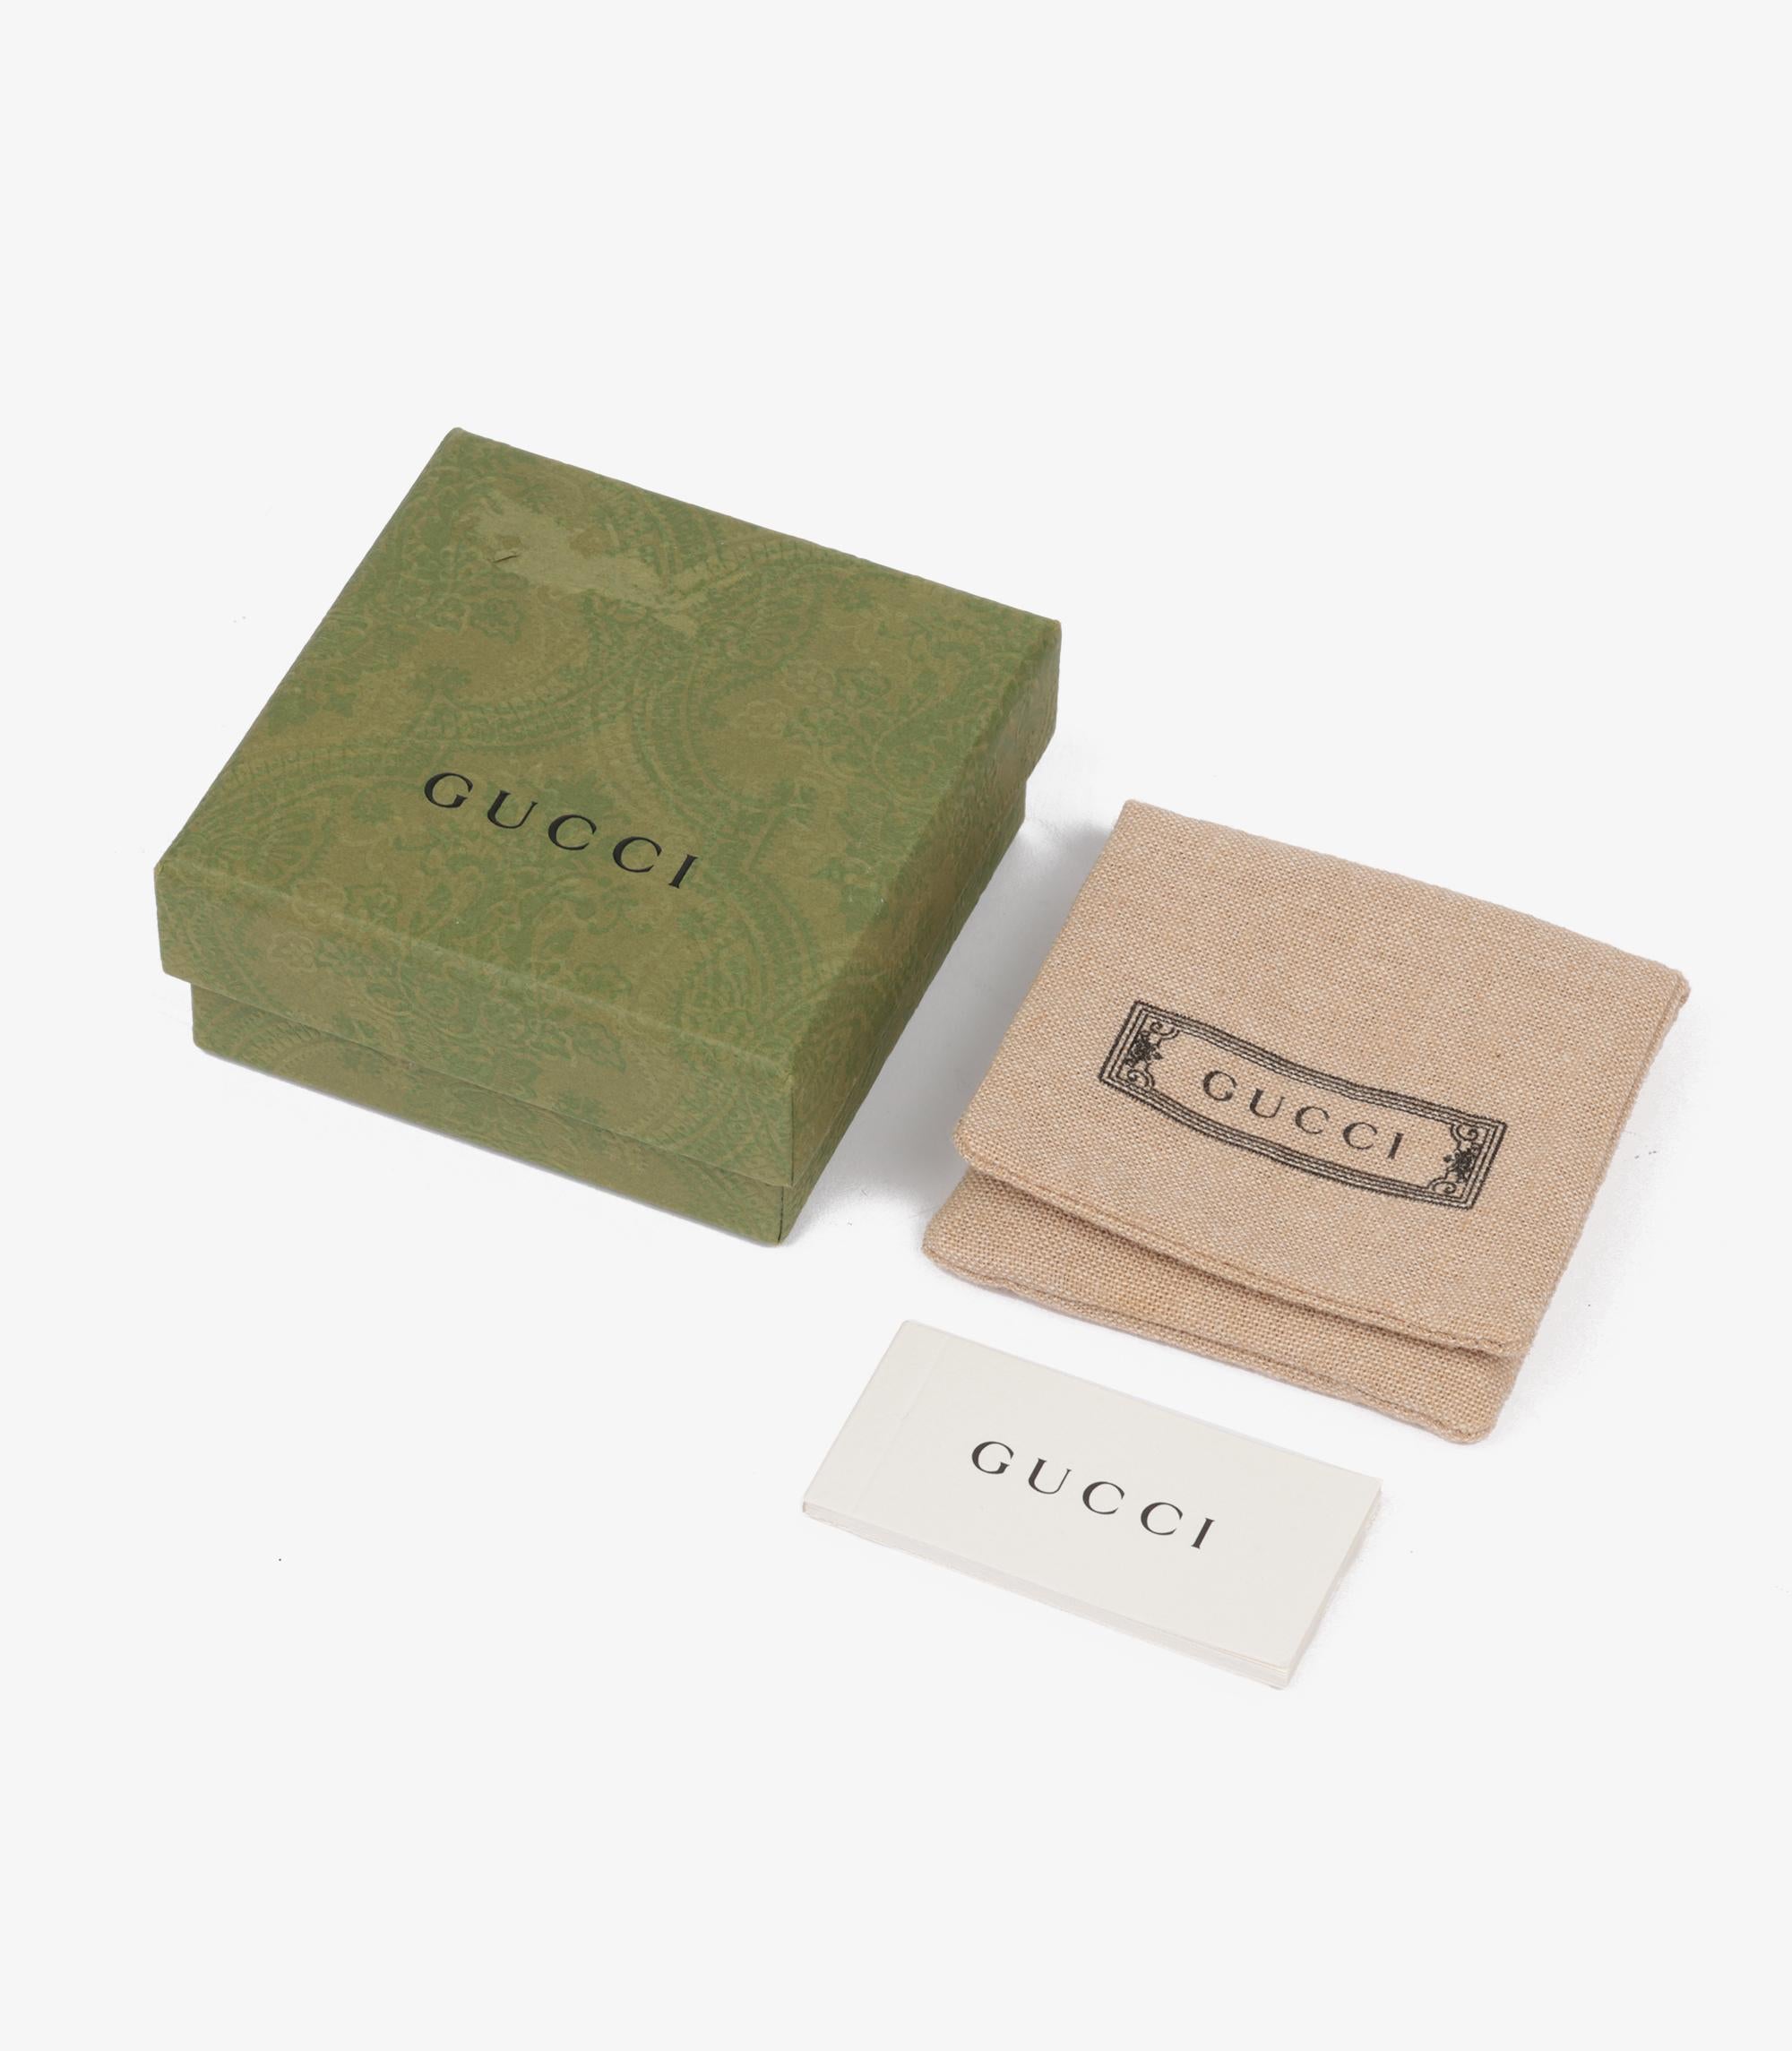 Gucci Sterling Silver GG Necklace

Brand- Gucci
Model- GG Necklace
Product Type- Necklace
Accompanied By- Gucci Box, Pouch, Care Book
Material(s)- Sterling Silver

Necklace Length- 44cm
Pendant Length- 1.6cm
Pendant Width- 2.5cm
Total Weight-